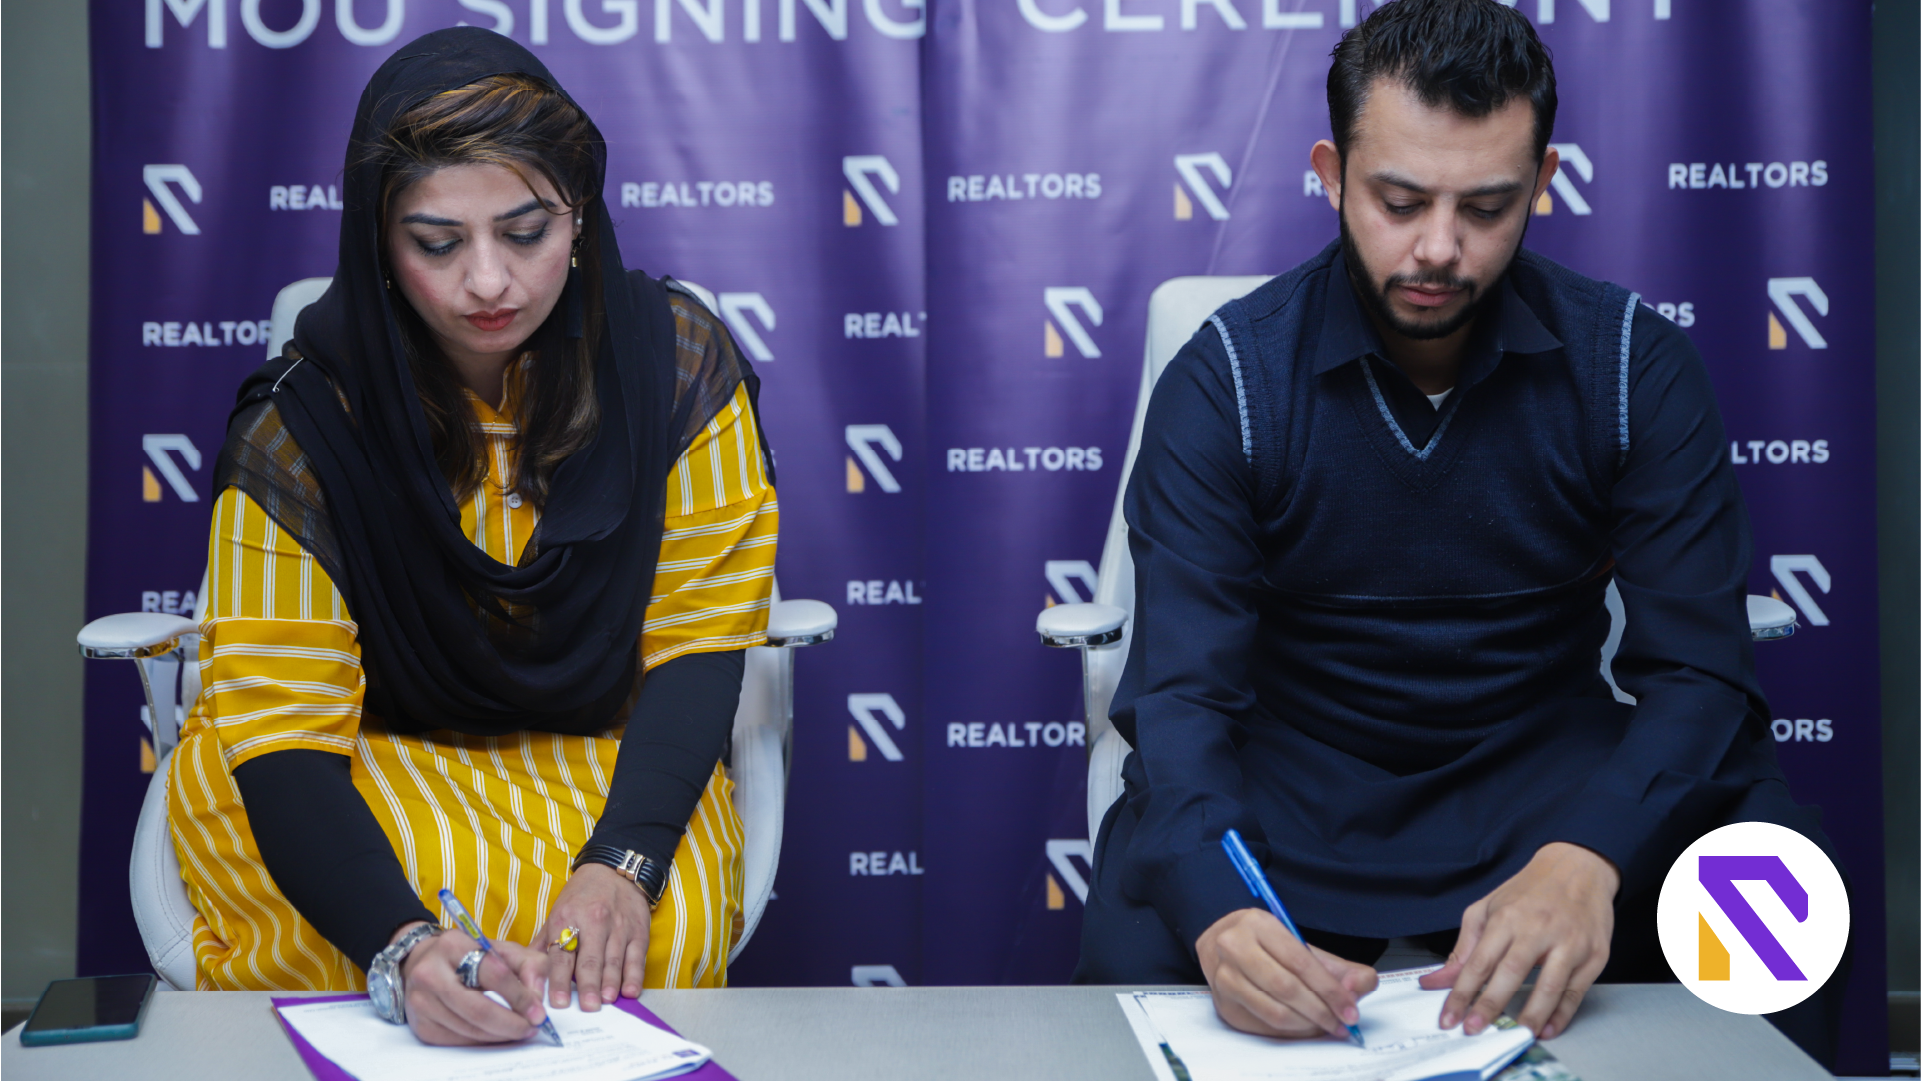 𝗔𝗶𝗺𝗮𝗹 𝗮𝗻𝗱 𝗭𝗮𝗶𝗻𝗮𝗯 𝗕𝘂𝗶𝗹𝗱𝗲𝗿𝘀 Signs MOU in Collaboration with Realtorspk.com